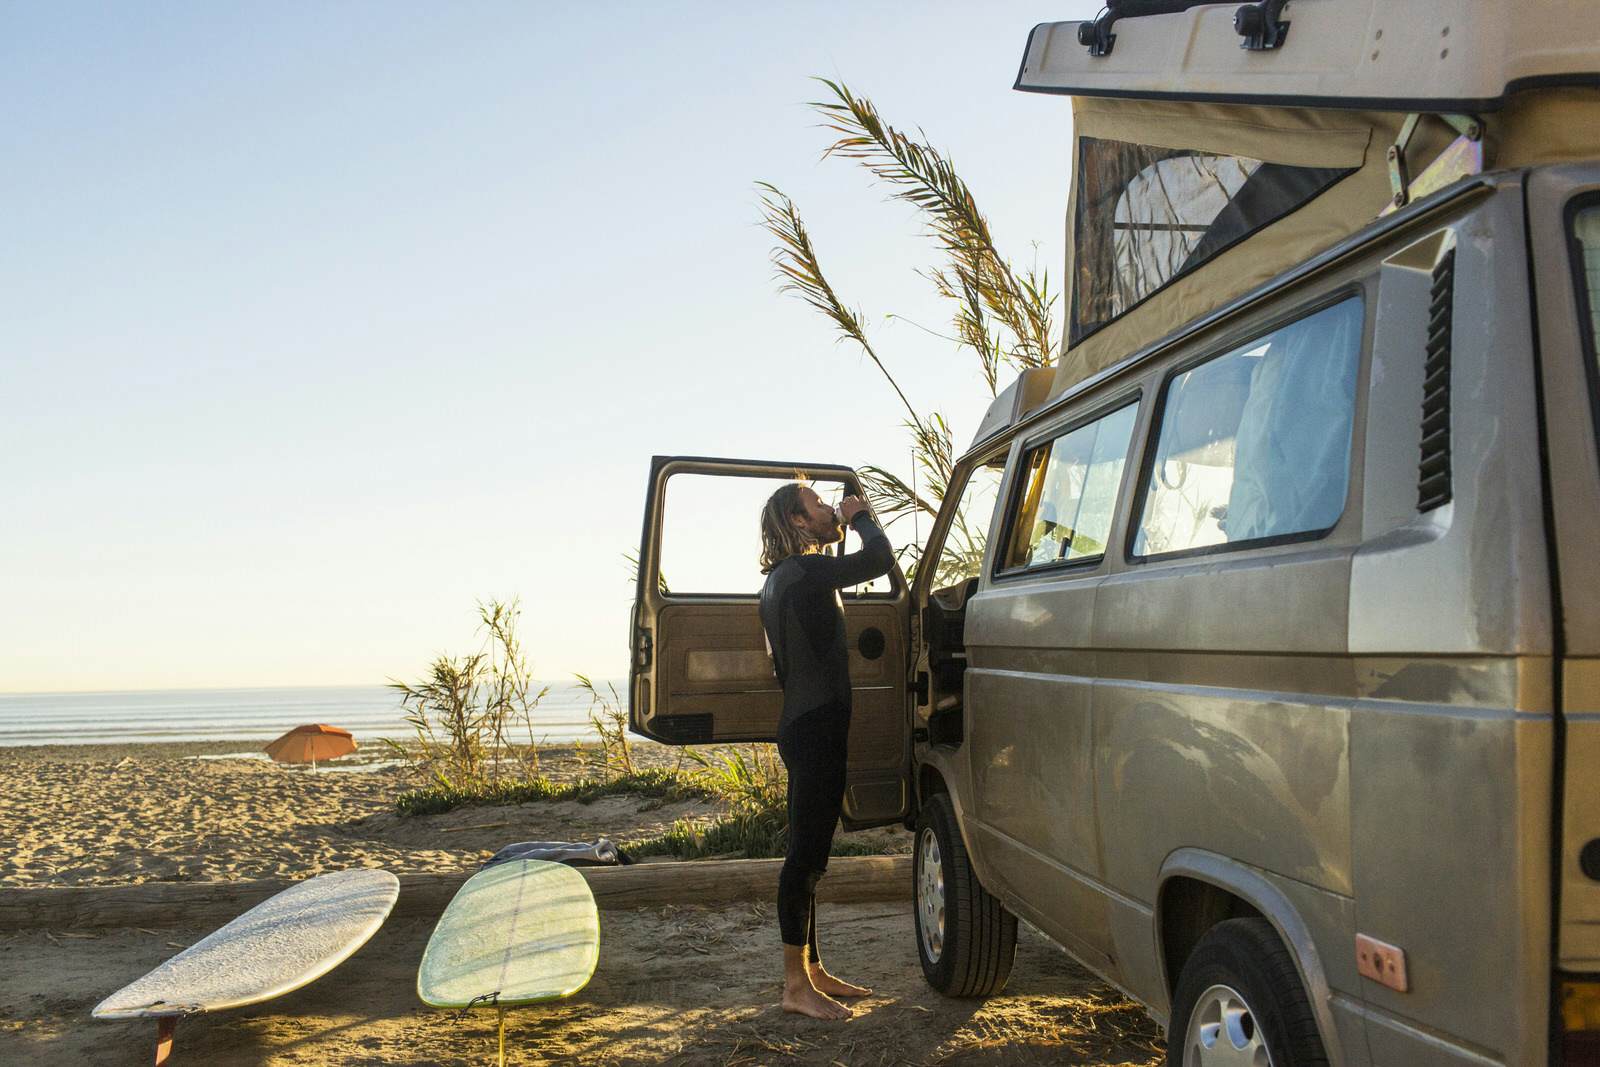 The 8 best destinations for an RV trip - Lonely Planet